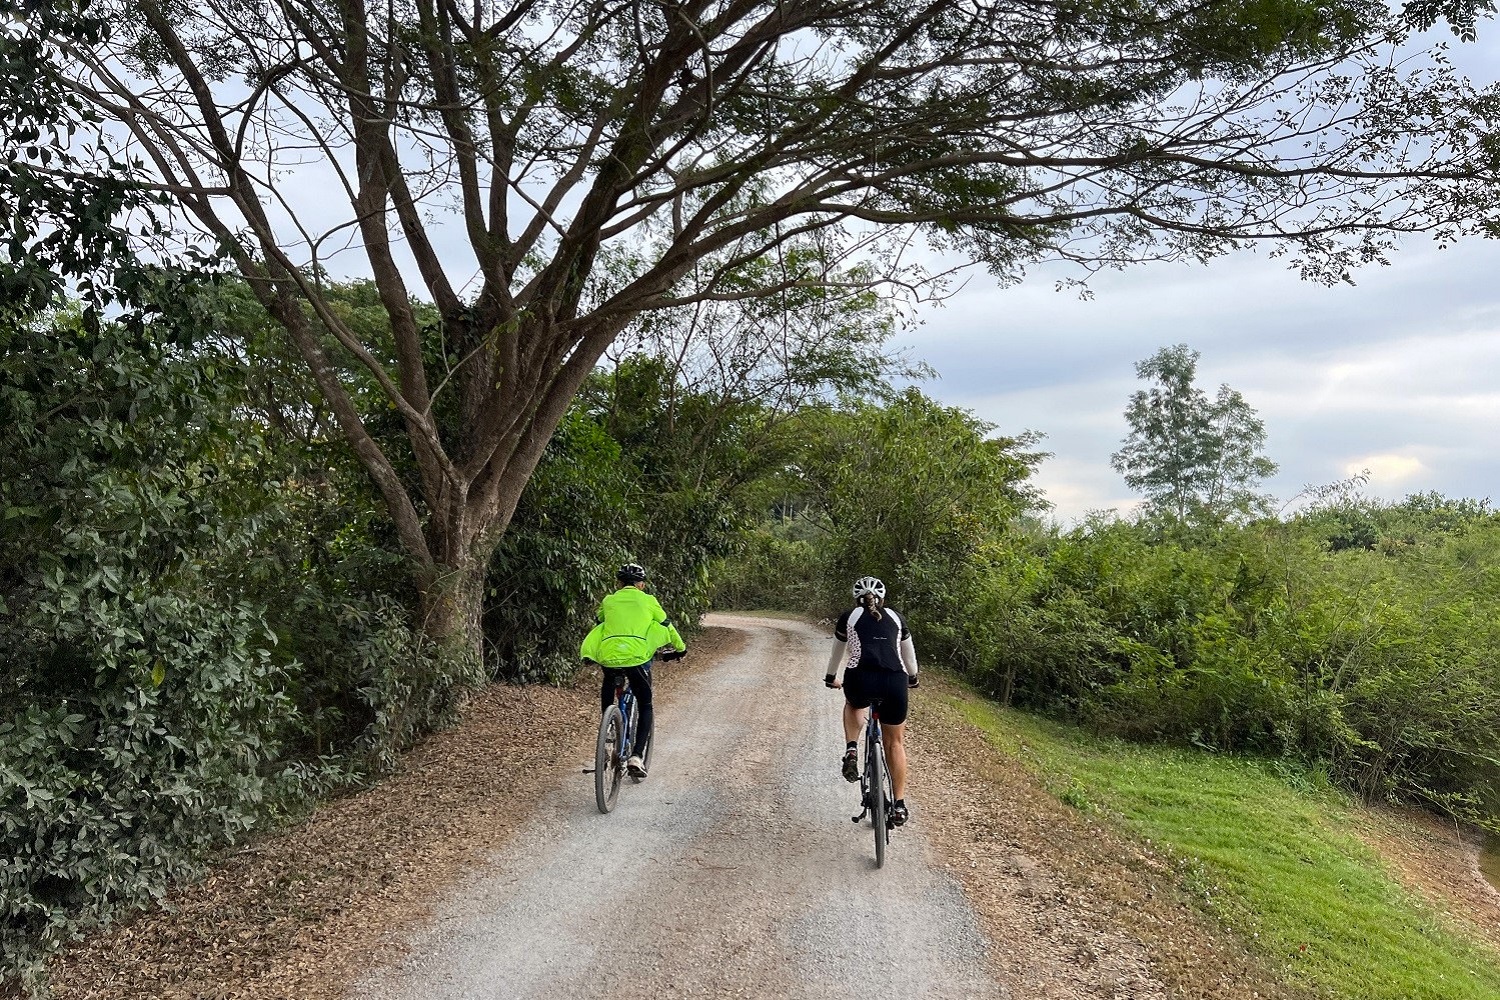 Photos from our North Thailand Cycling Holiday